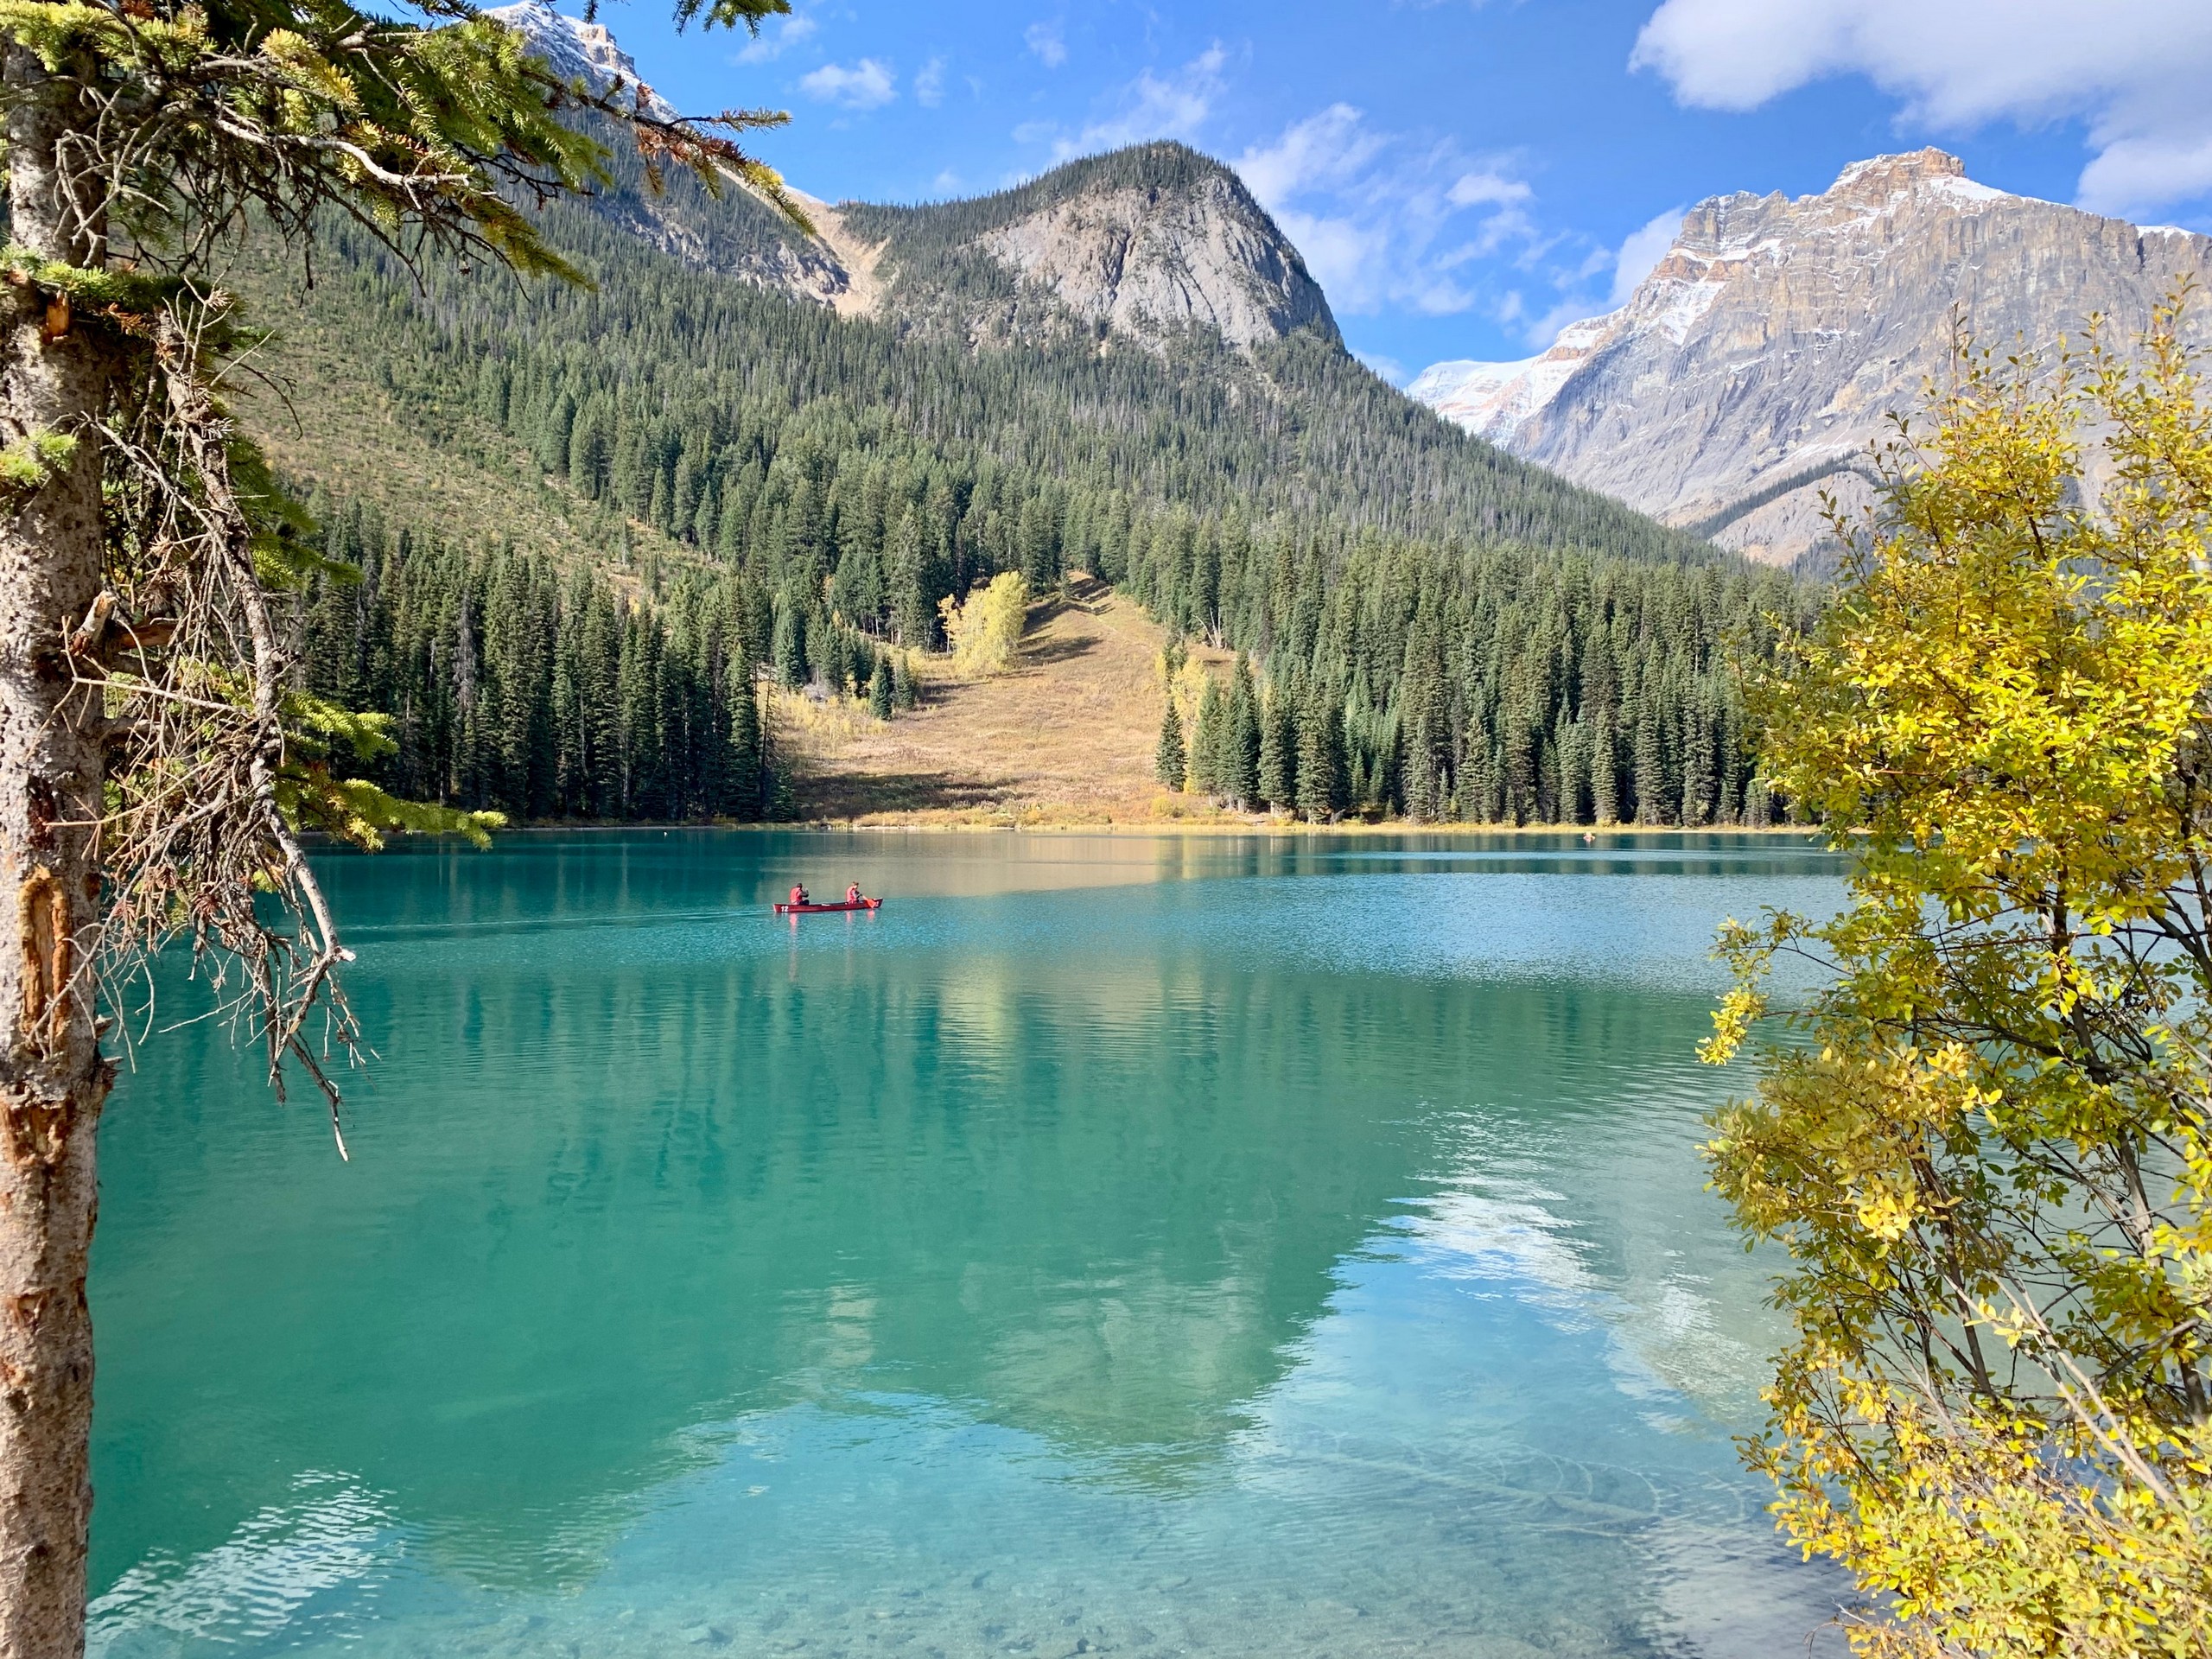 Turquoise water in Banff National Park